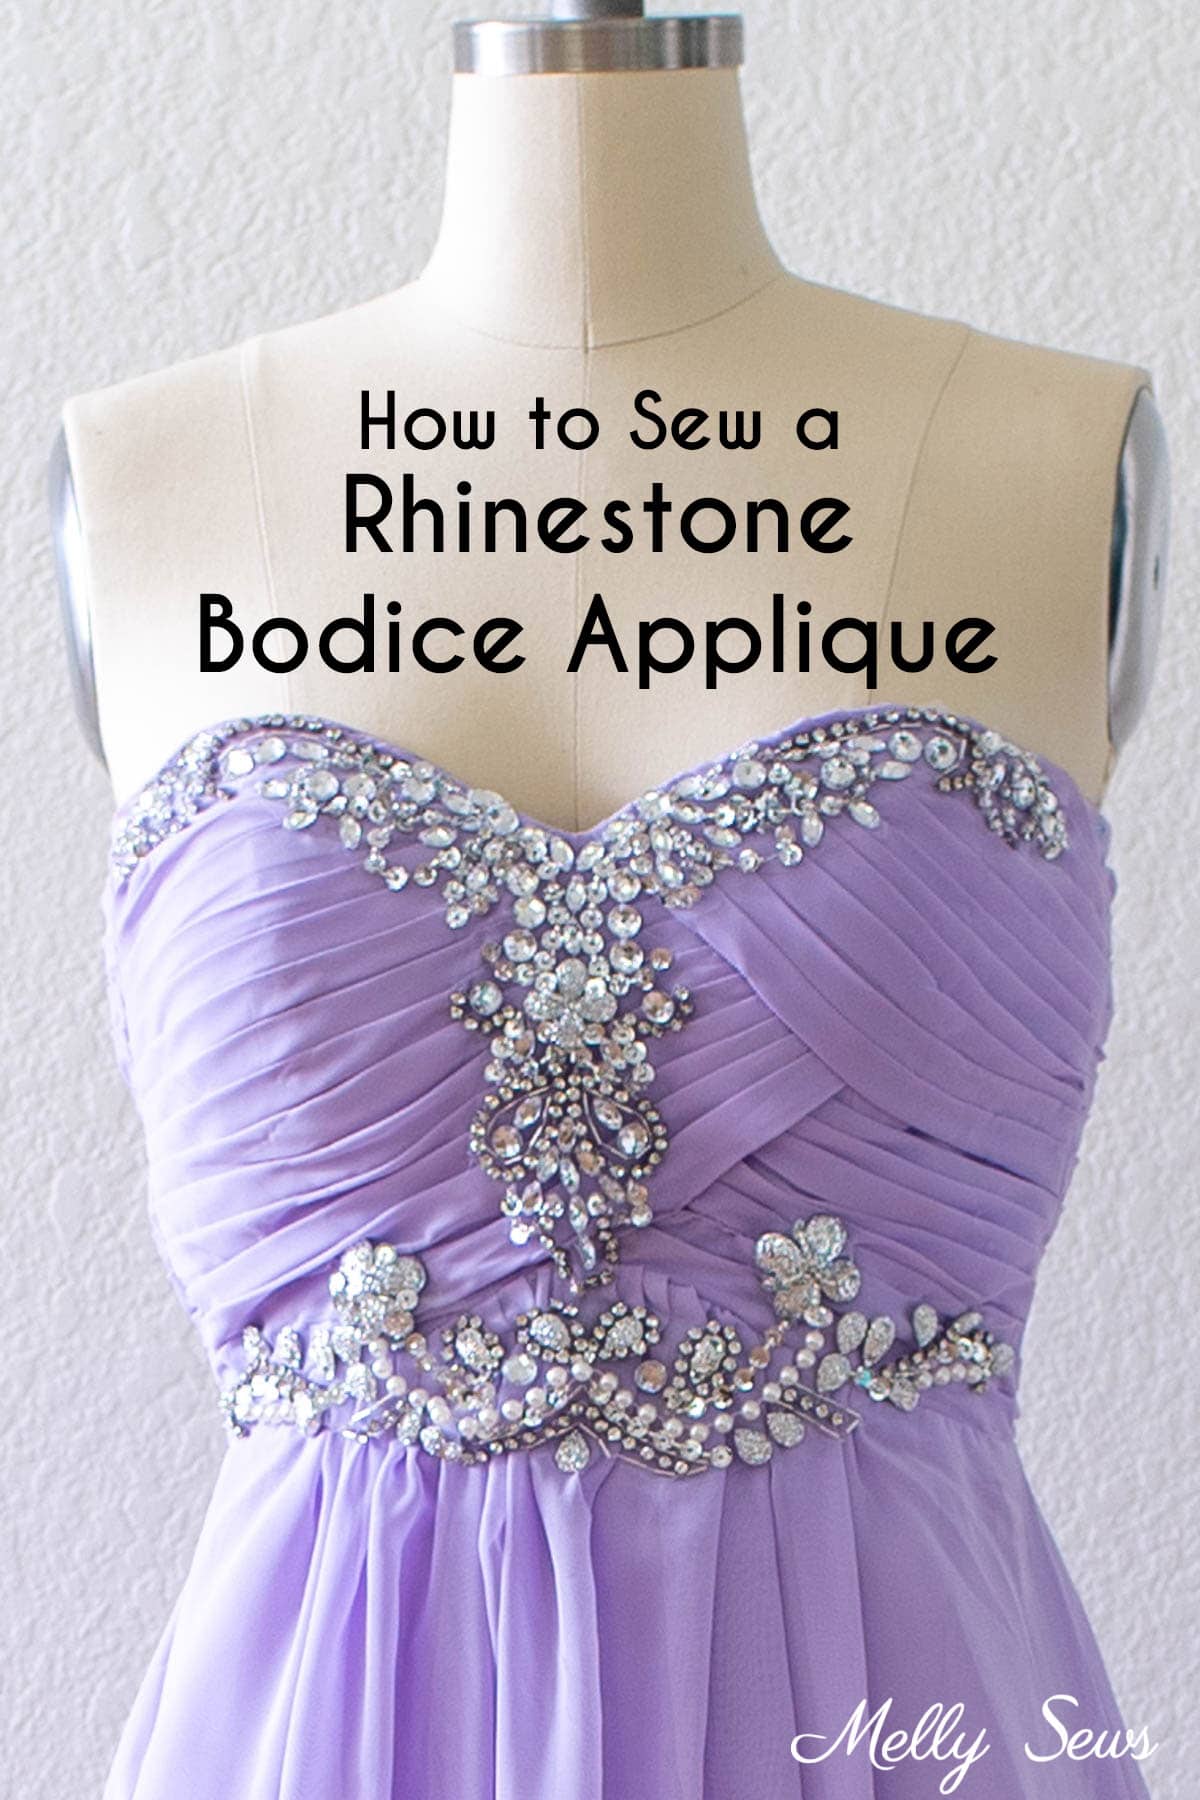 Invisible Mesh Dress with Appliques Tutorial - No Pattern Needed 